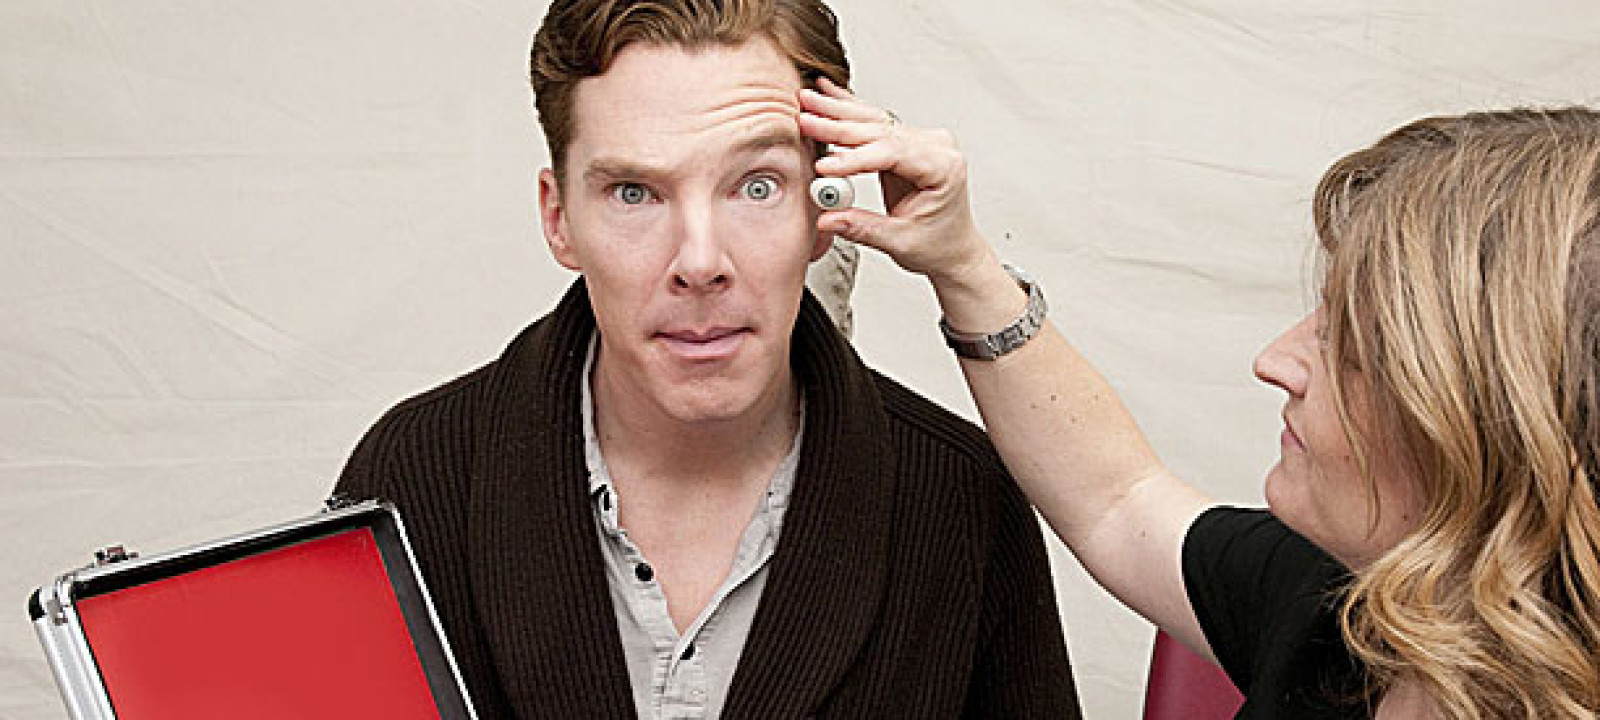 Benedict Cumberbatch S Waxwork Fitting A Feast For The Eyes Anglophenia c America